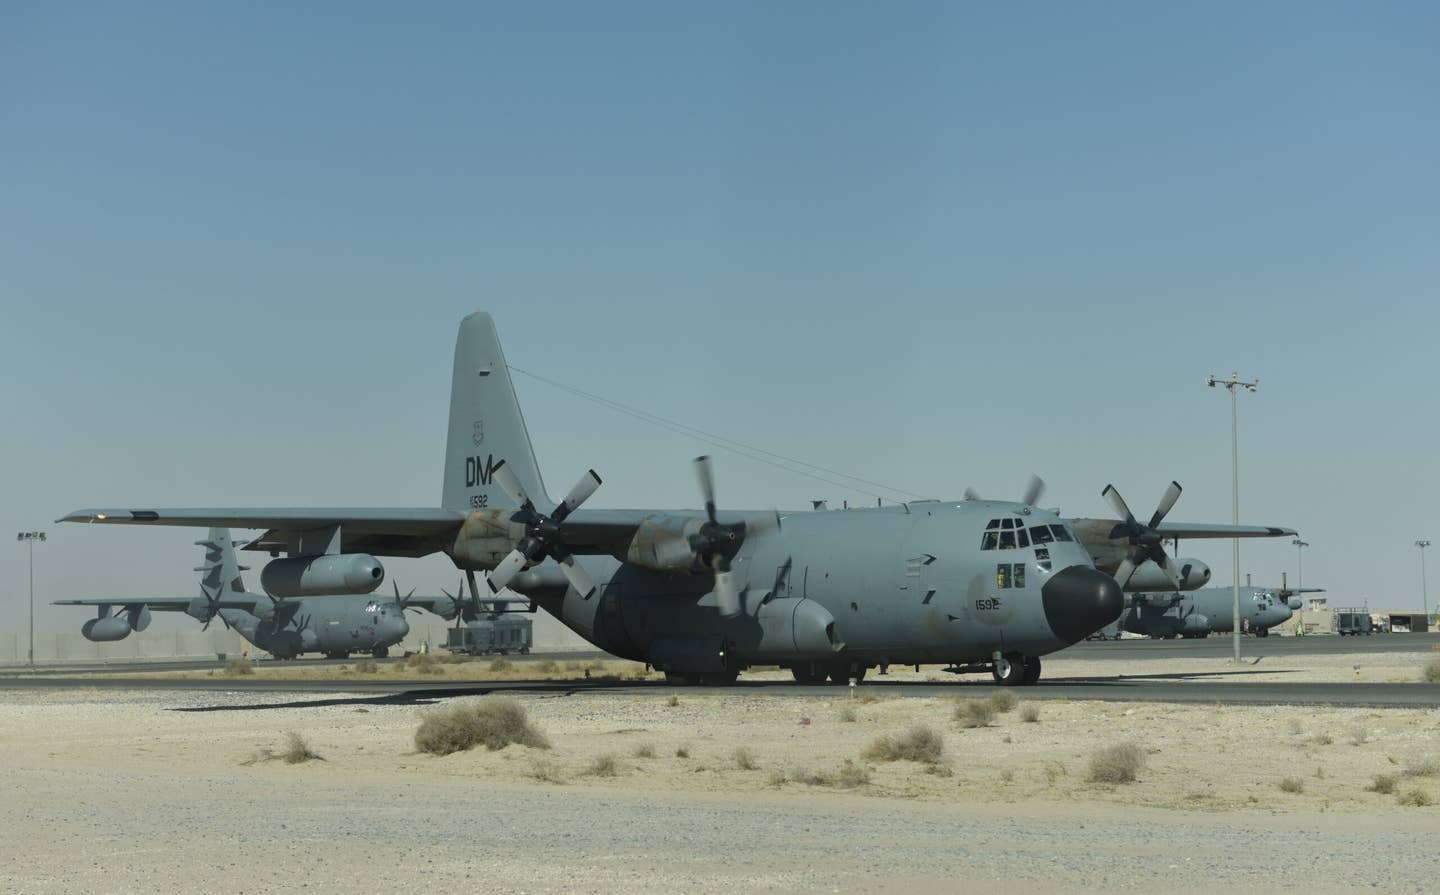 An EC-130H Compass Call travels along the taxiway at an undisclosed location in Southwest Asia, June 27, 2017. <em>Credit: U.S. Air Force photo by Tech. Sgt. Jonathan Hehnly</em>